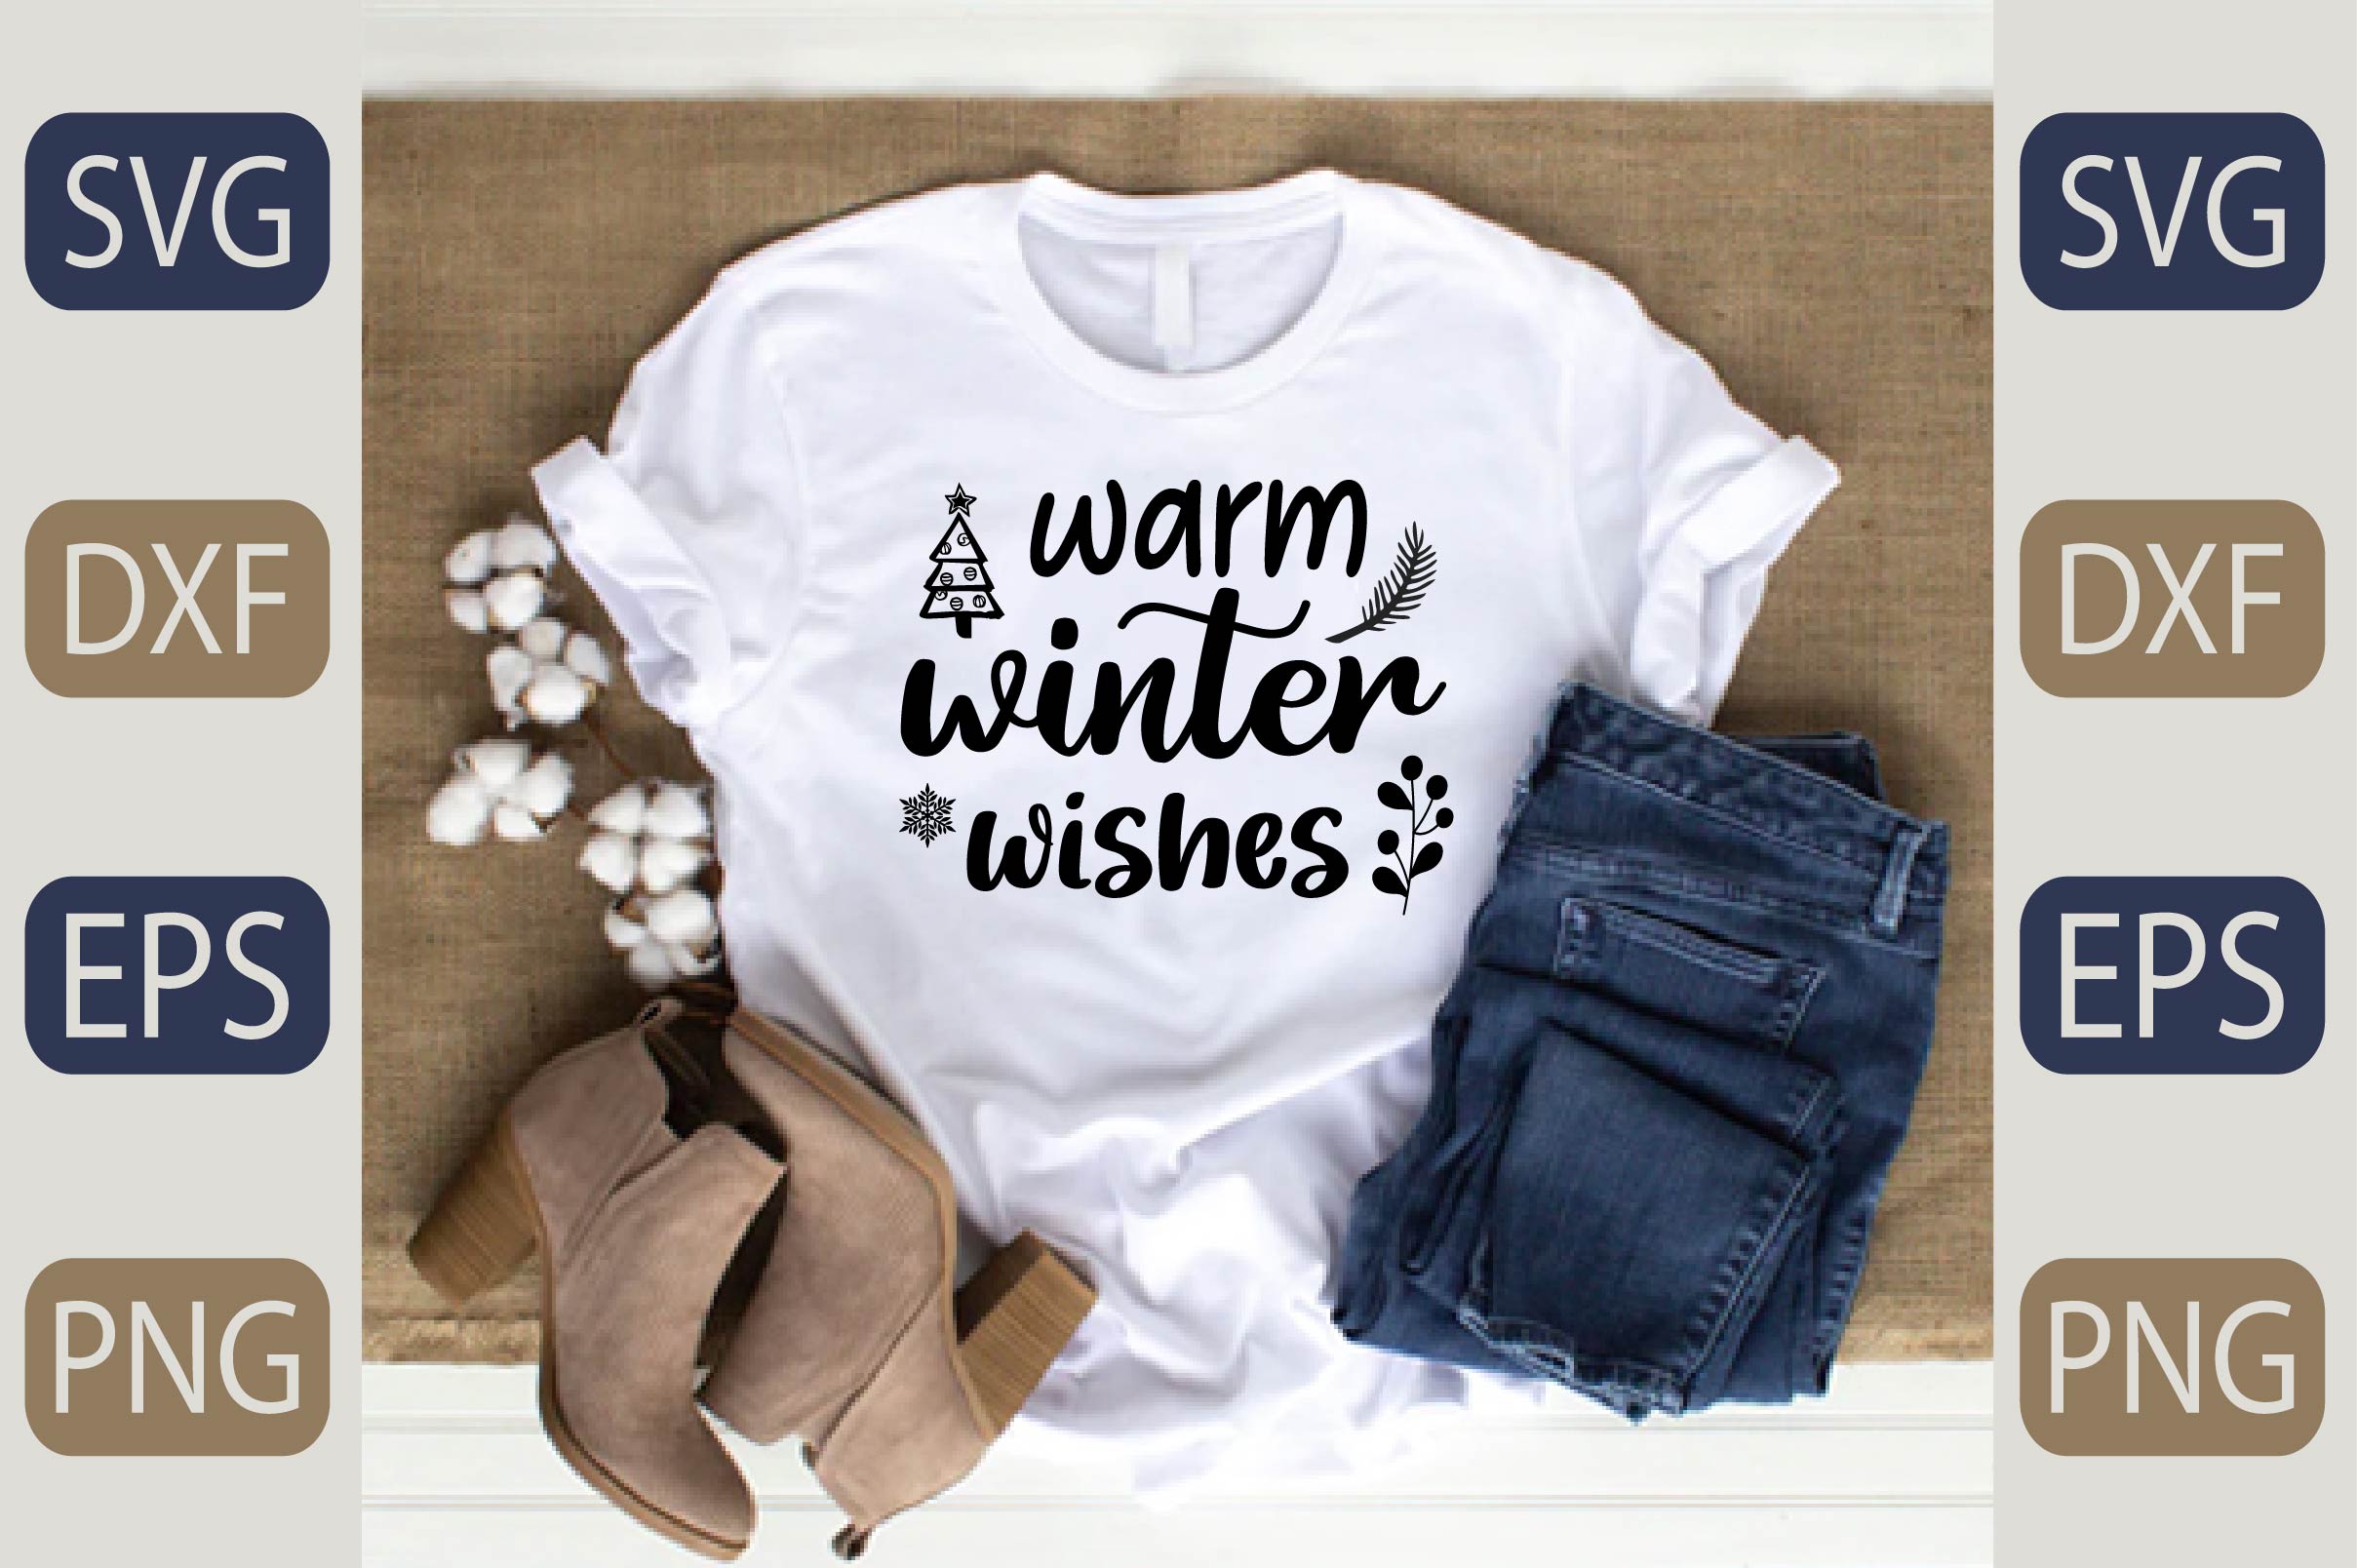 T - shirt that says warm winter wishes.